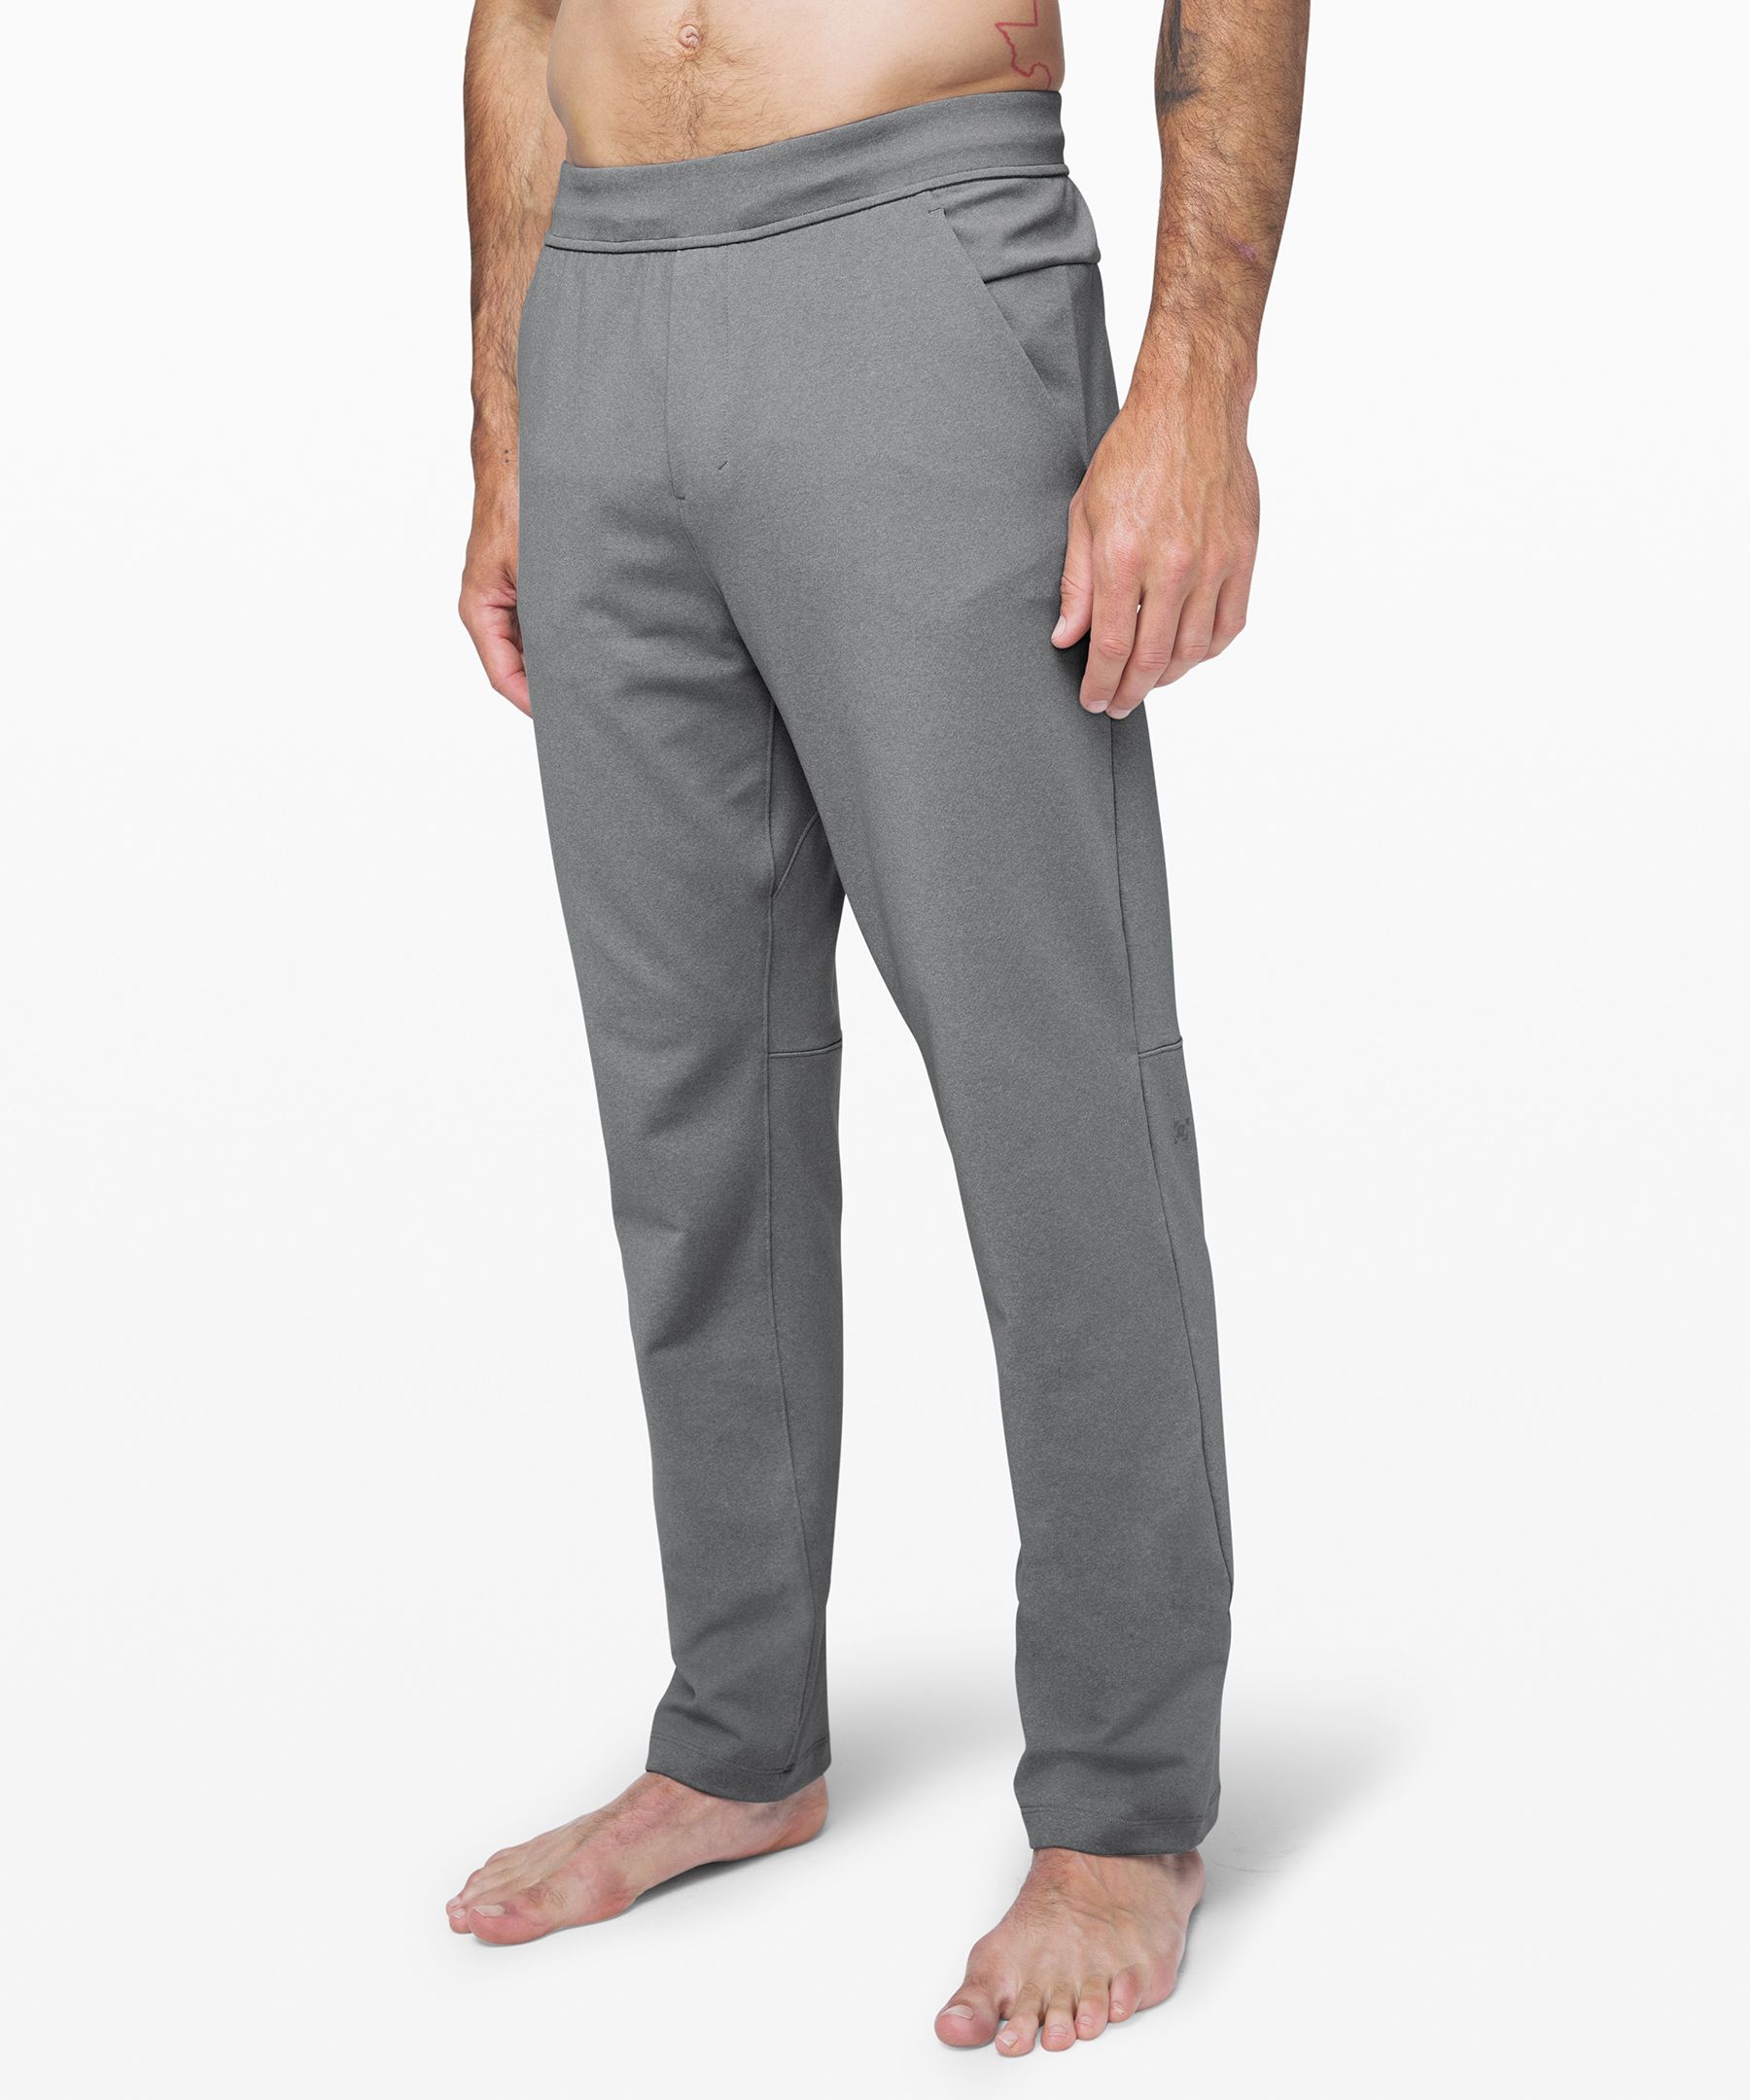 Lululemon Discipline Pant (tall) *online Only 34" In Heathered Light Cast